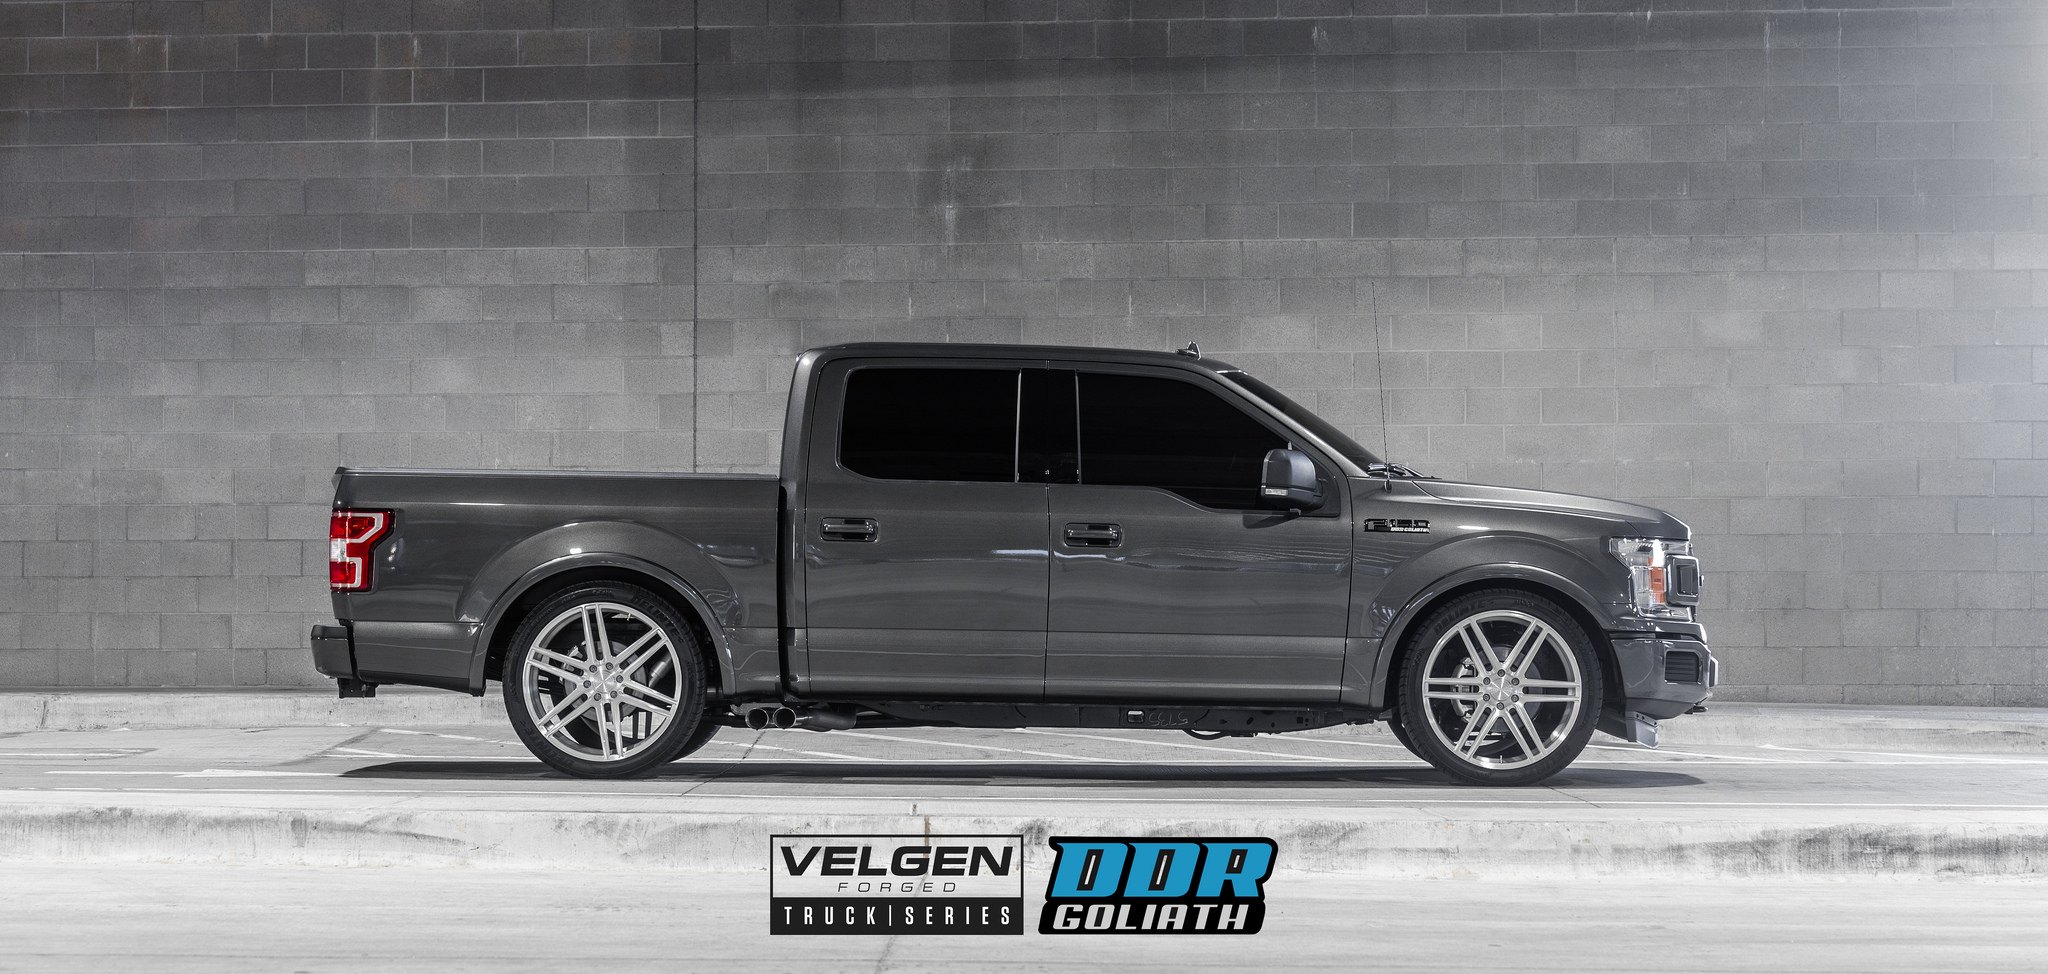 Aftermarket Running Boards on Gray Ford F-150 - Photo by Velgen